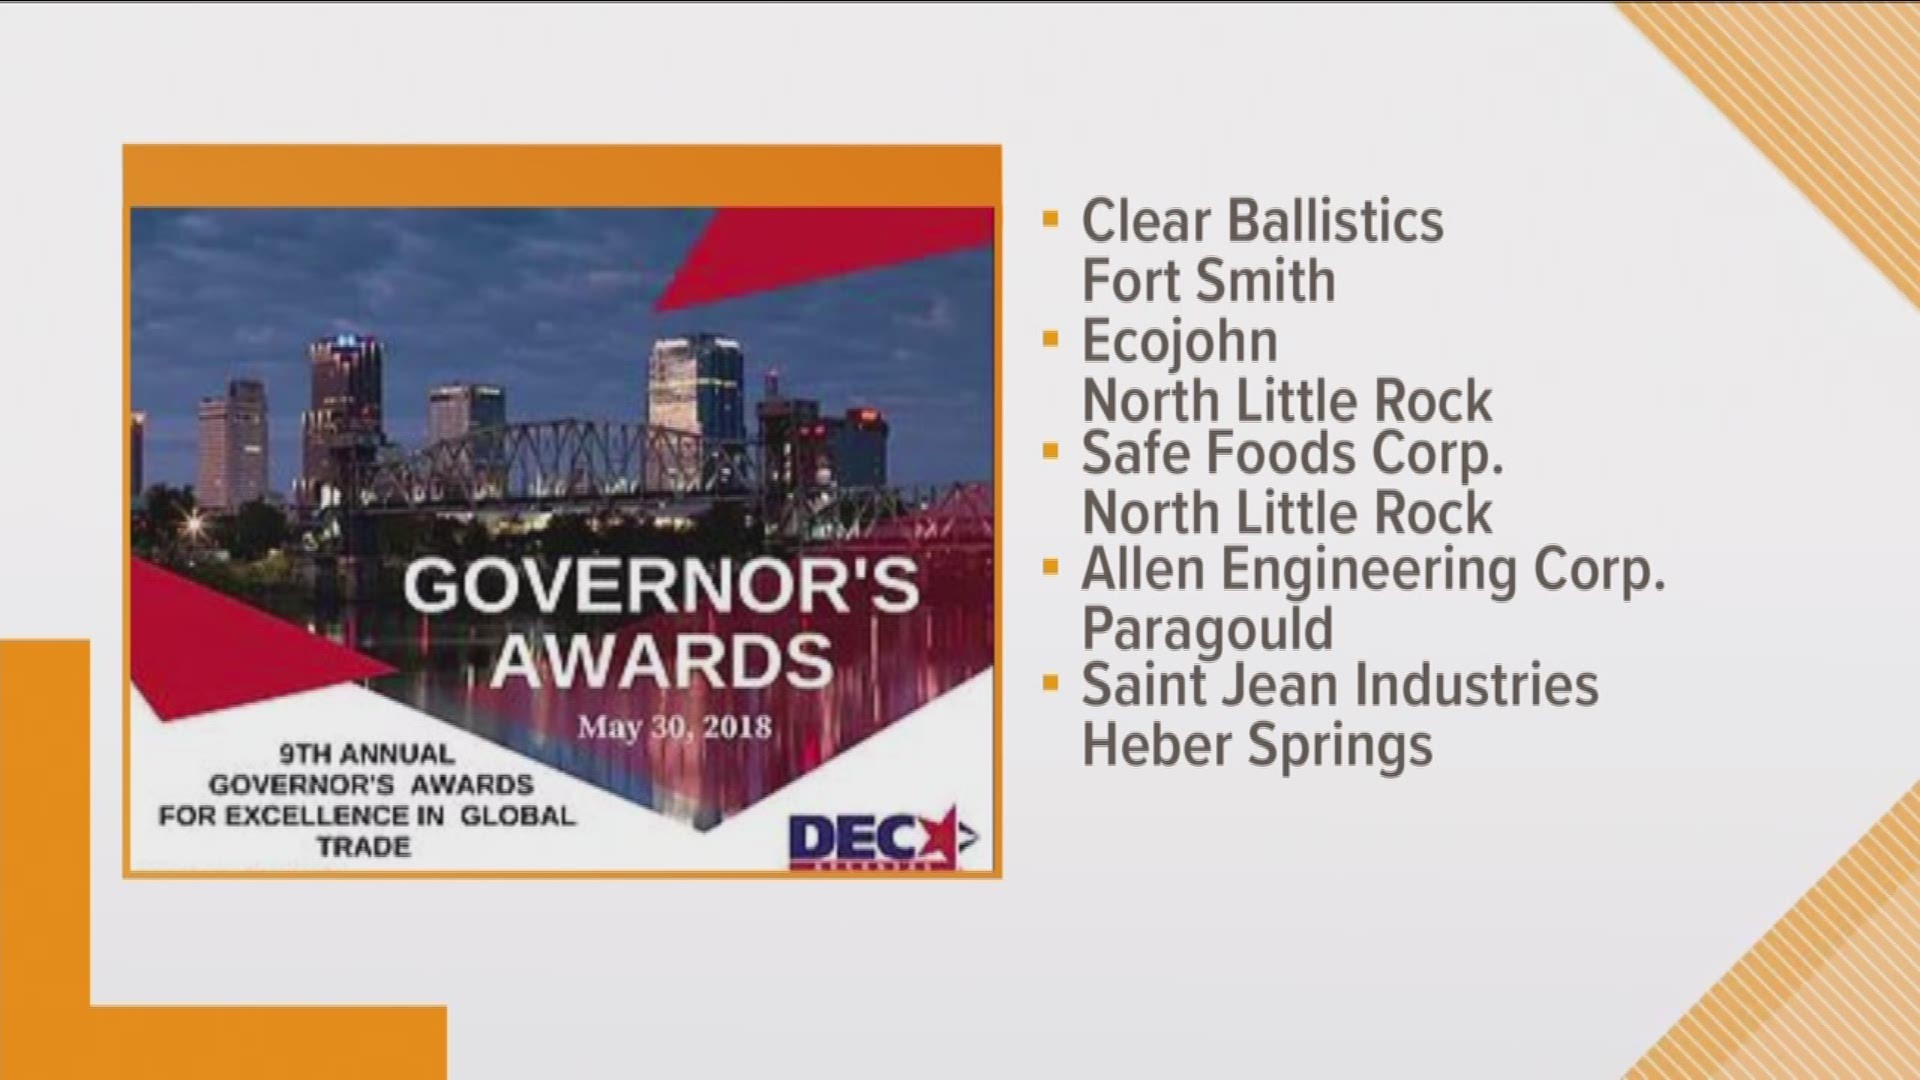 The Governor's Awards and other headlines.